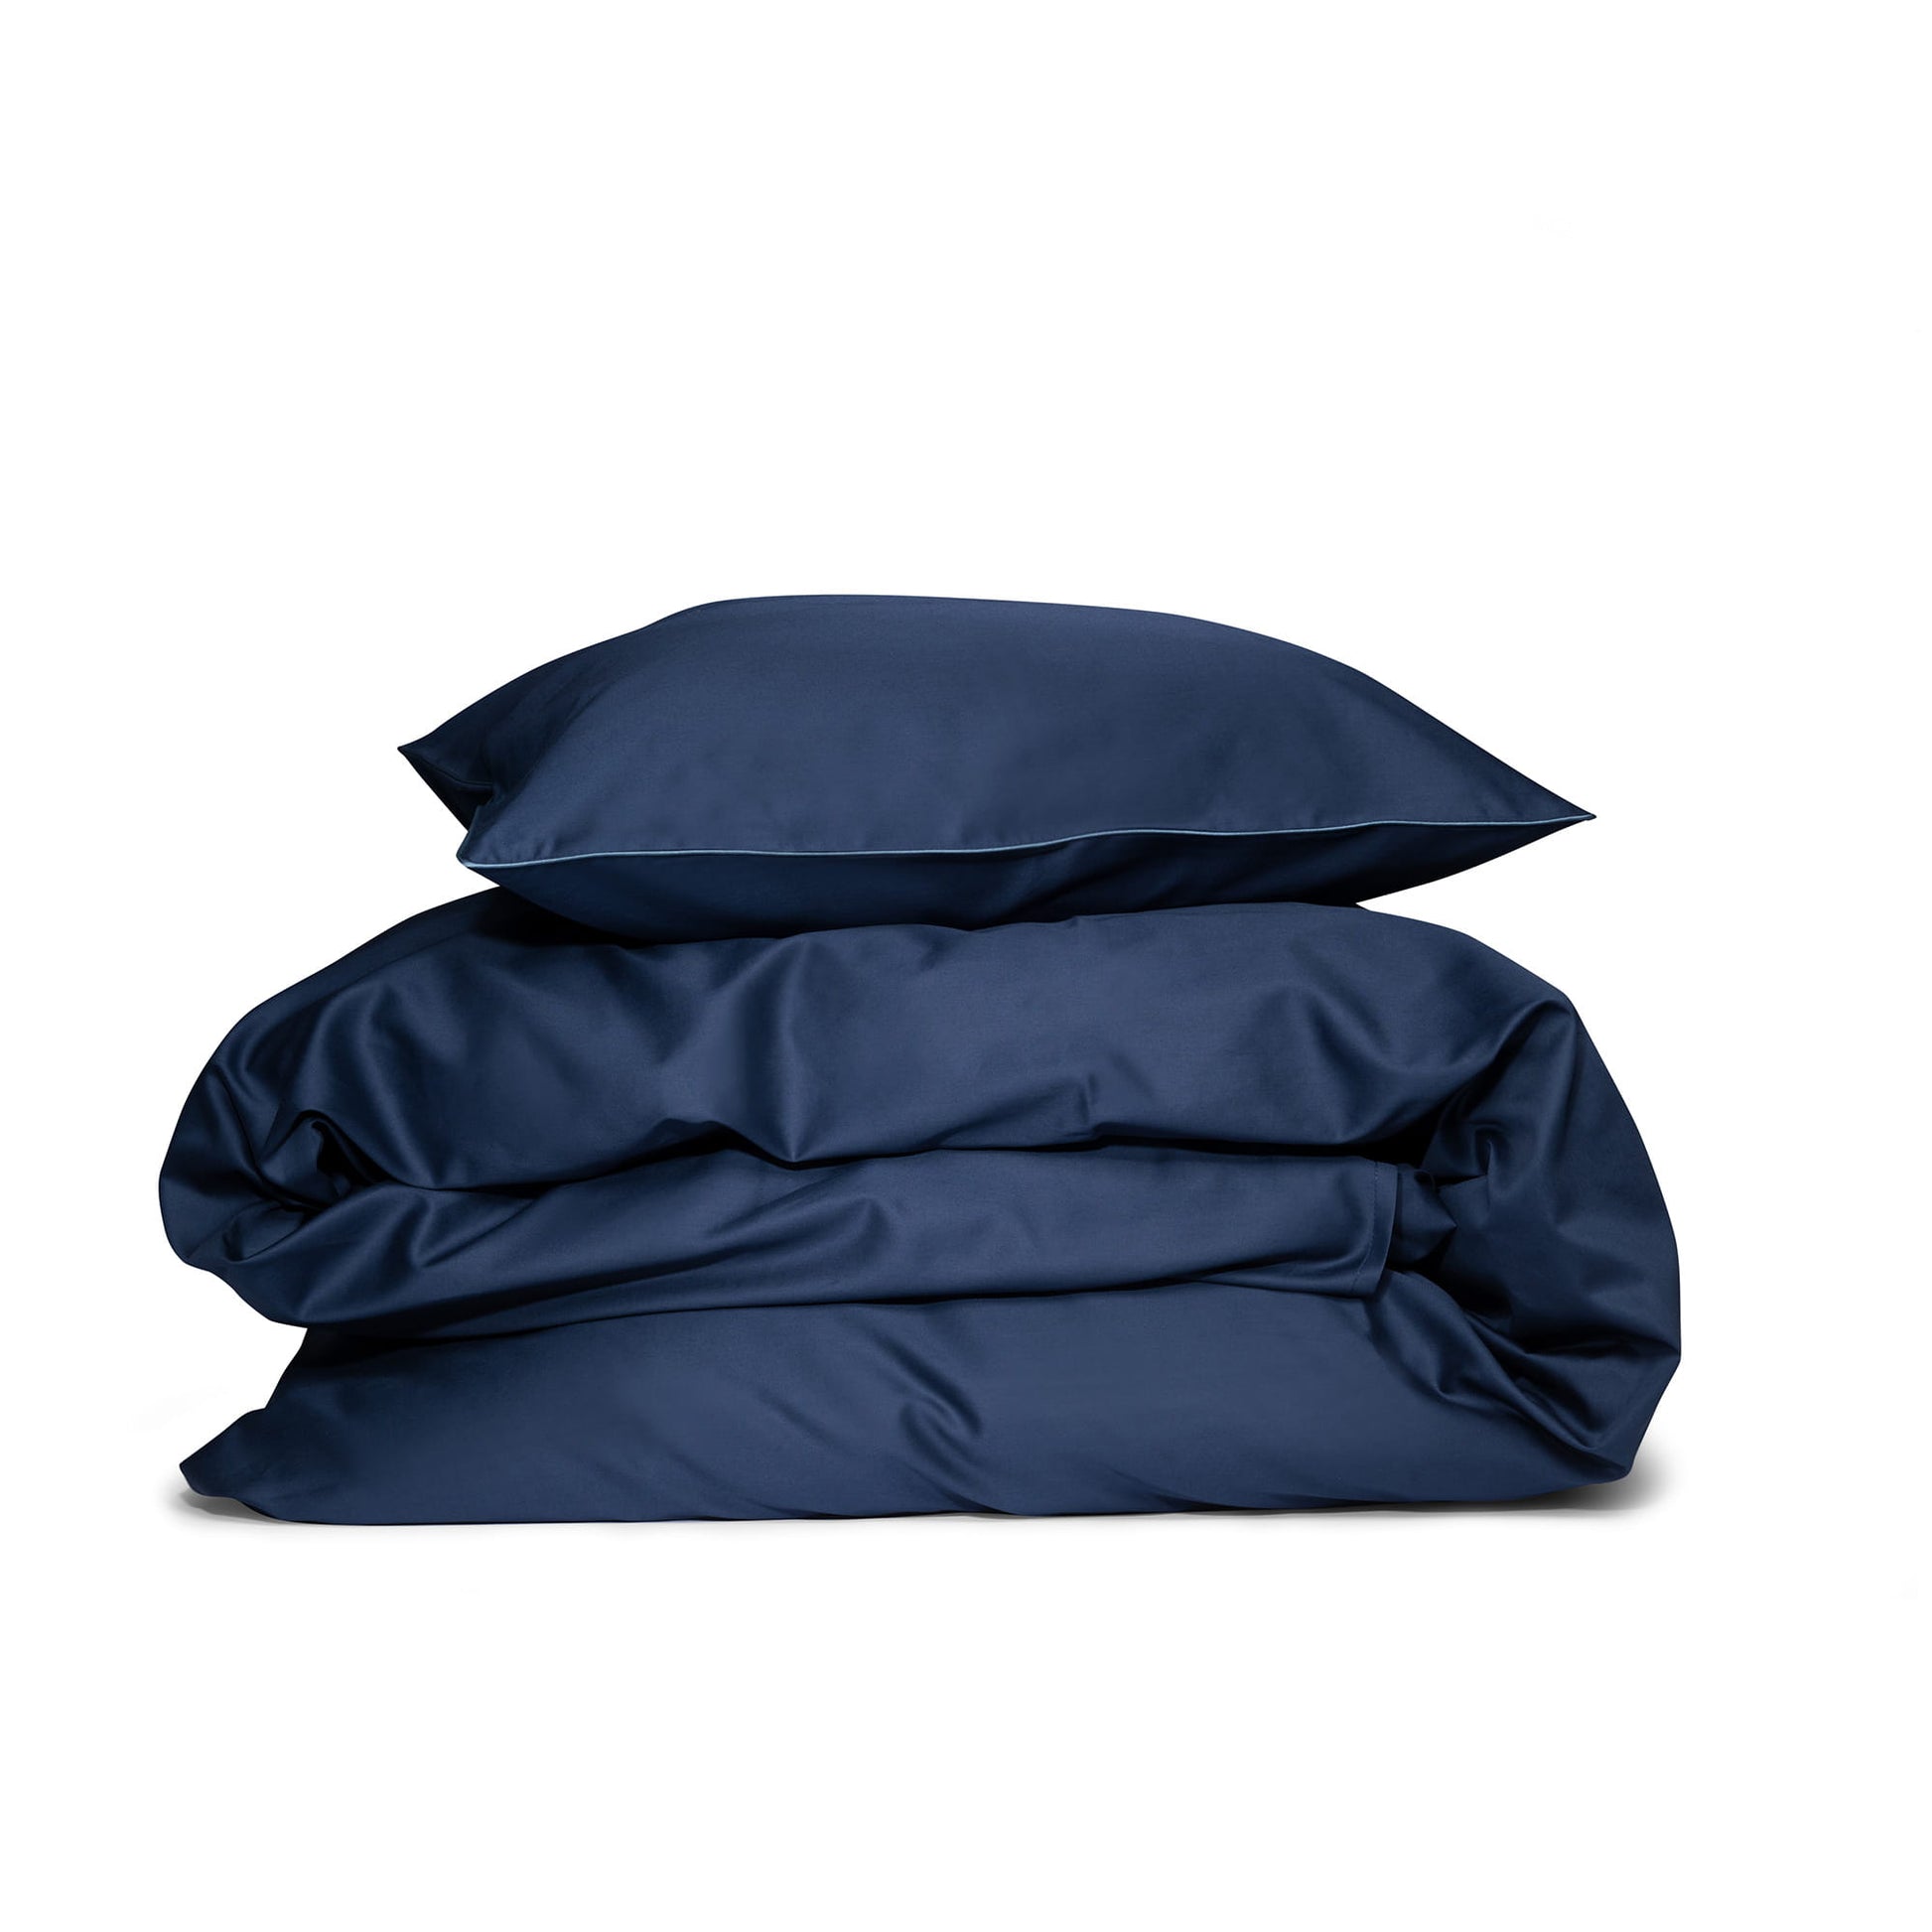 100% Sateen Cotton Duvet Cover Royal Blue With Pillow